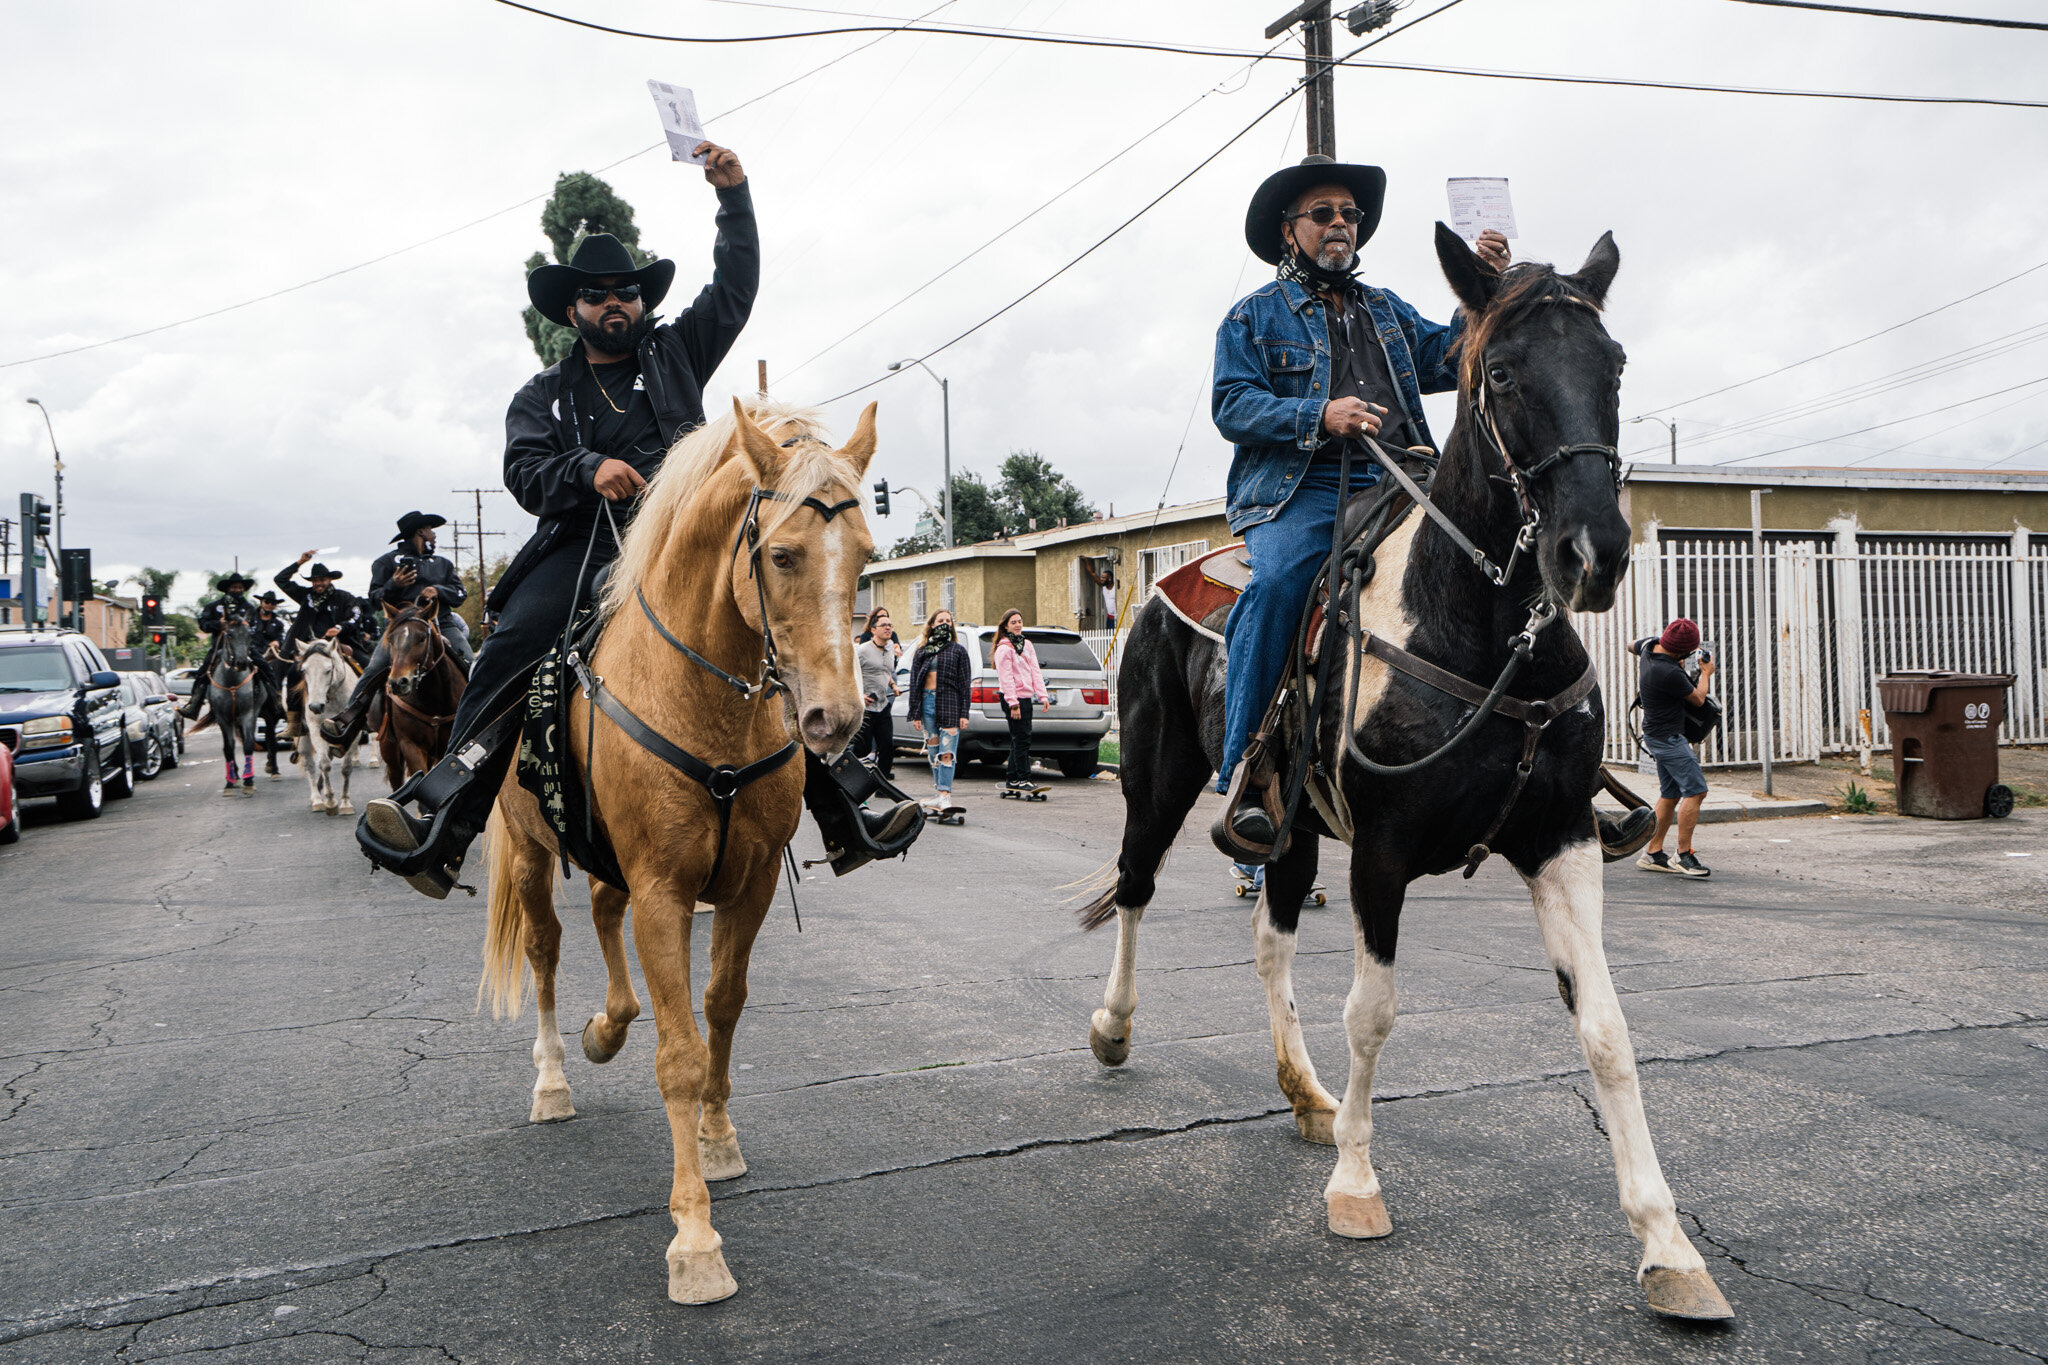  The Compton Cowboys ride to the City of Compton Public Library ballot box on October 25, 2020 to cast their ballots. 